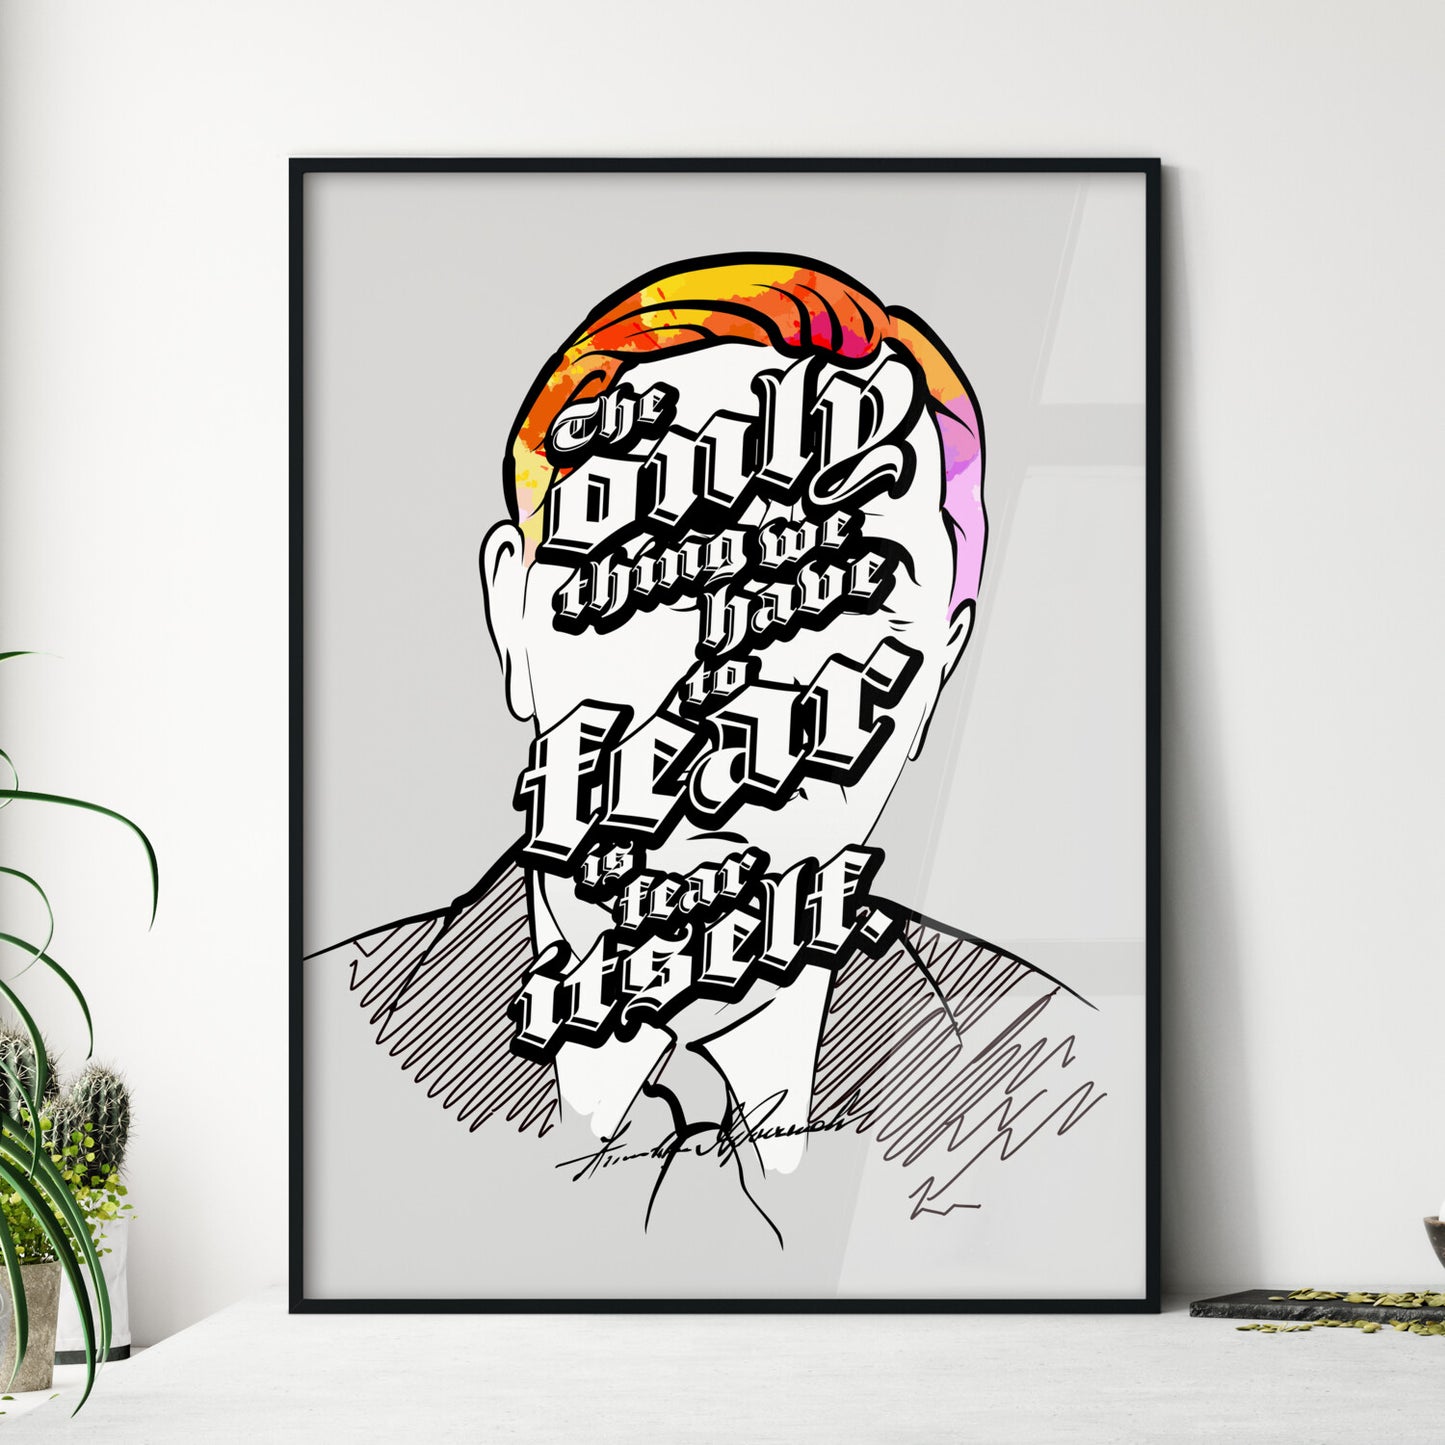 Franklin D. Roosevelt Art Print – The Only Thing We Have To Fear Is Fear Itself Quote. Perfect print for patriots.